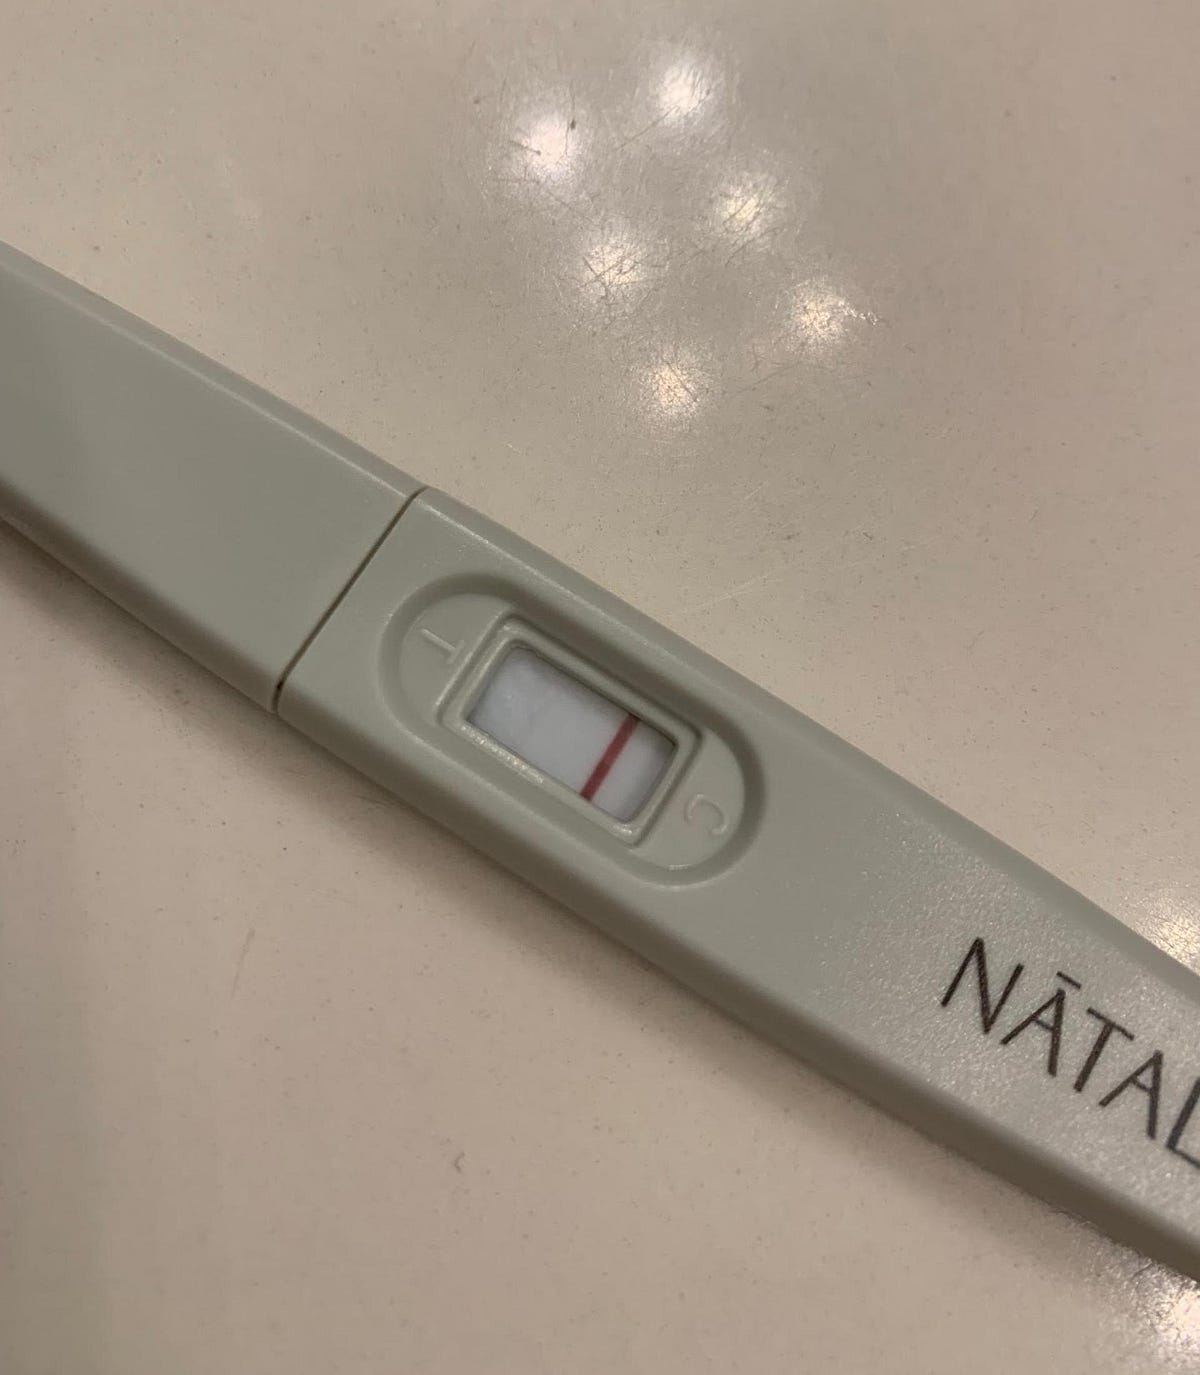 How Early Can I Take a Pregnancy Test?, by Natalist